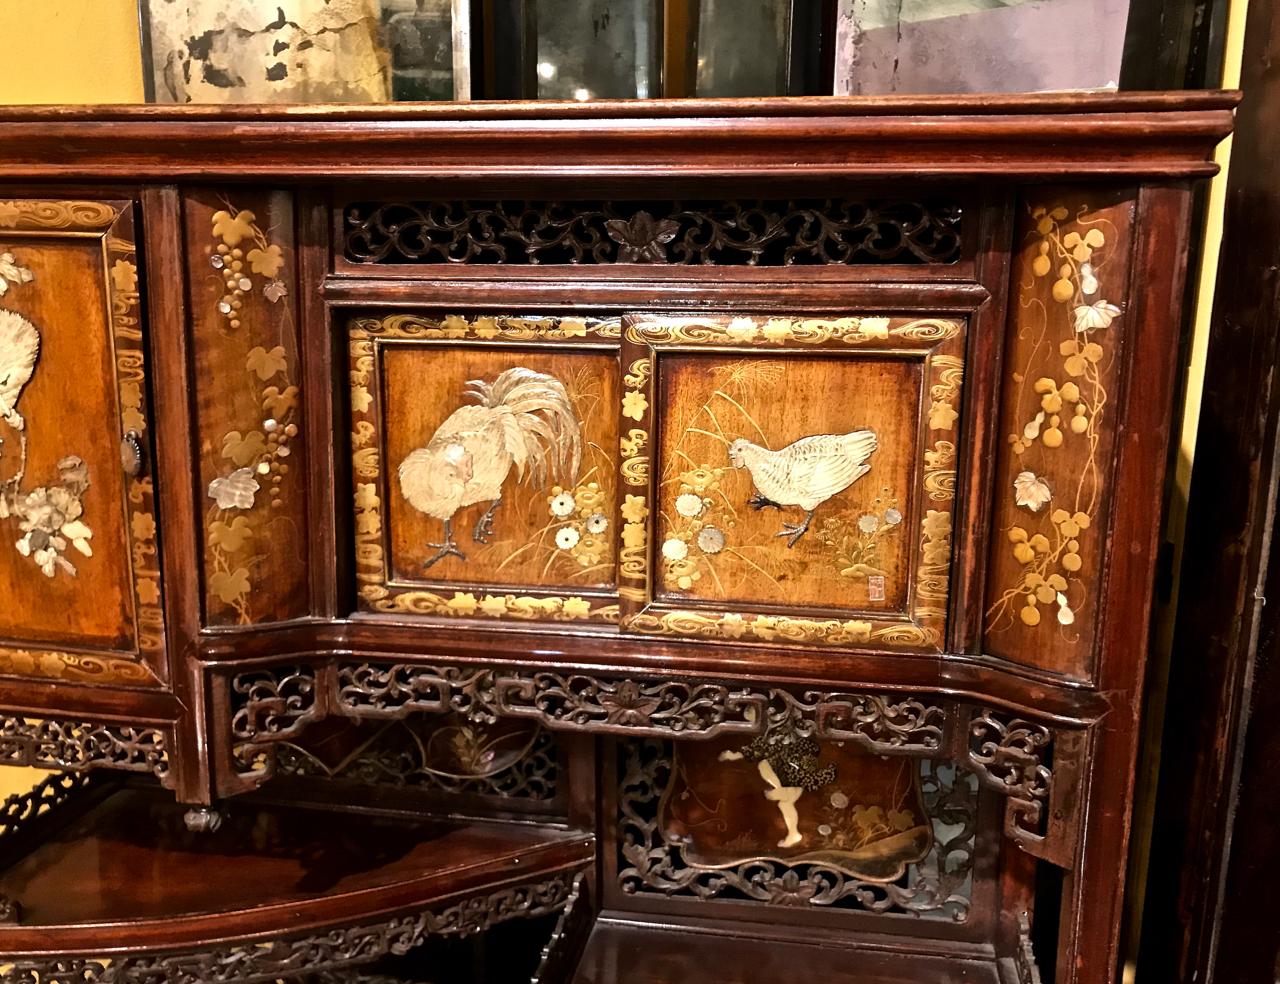 Beautiful signed and finely detail Japanese Meiji period Shibayama cabinet. Many of the individual lacquer panels are signed by the artist. The cabinet is in excellent unrestored condition.